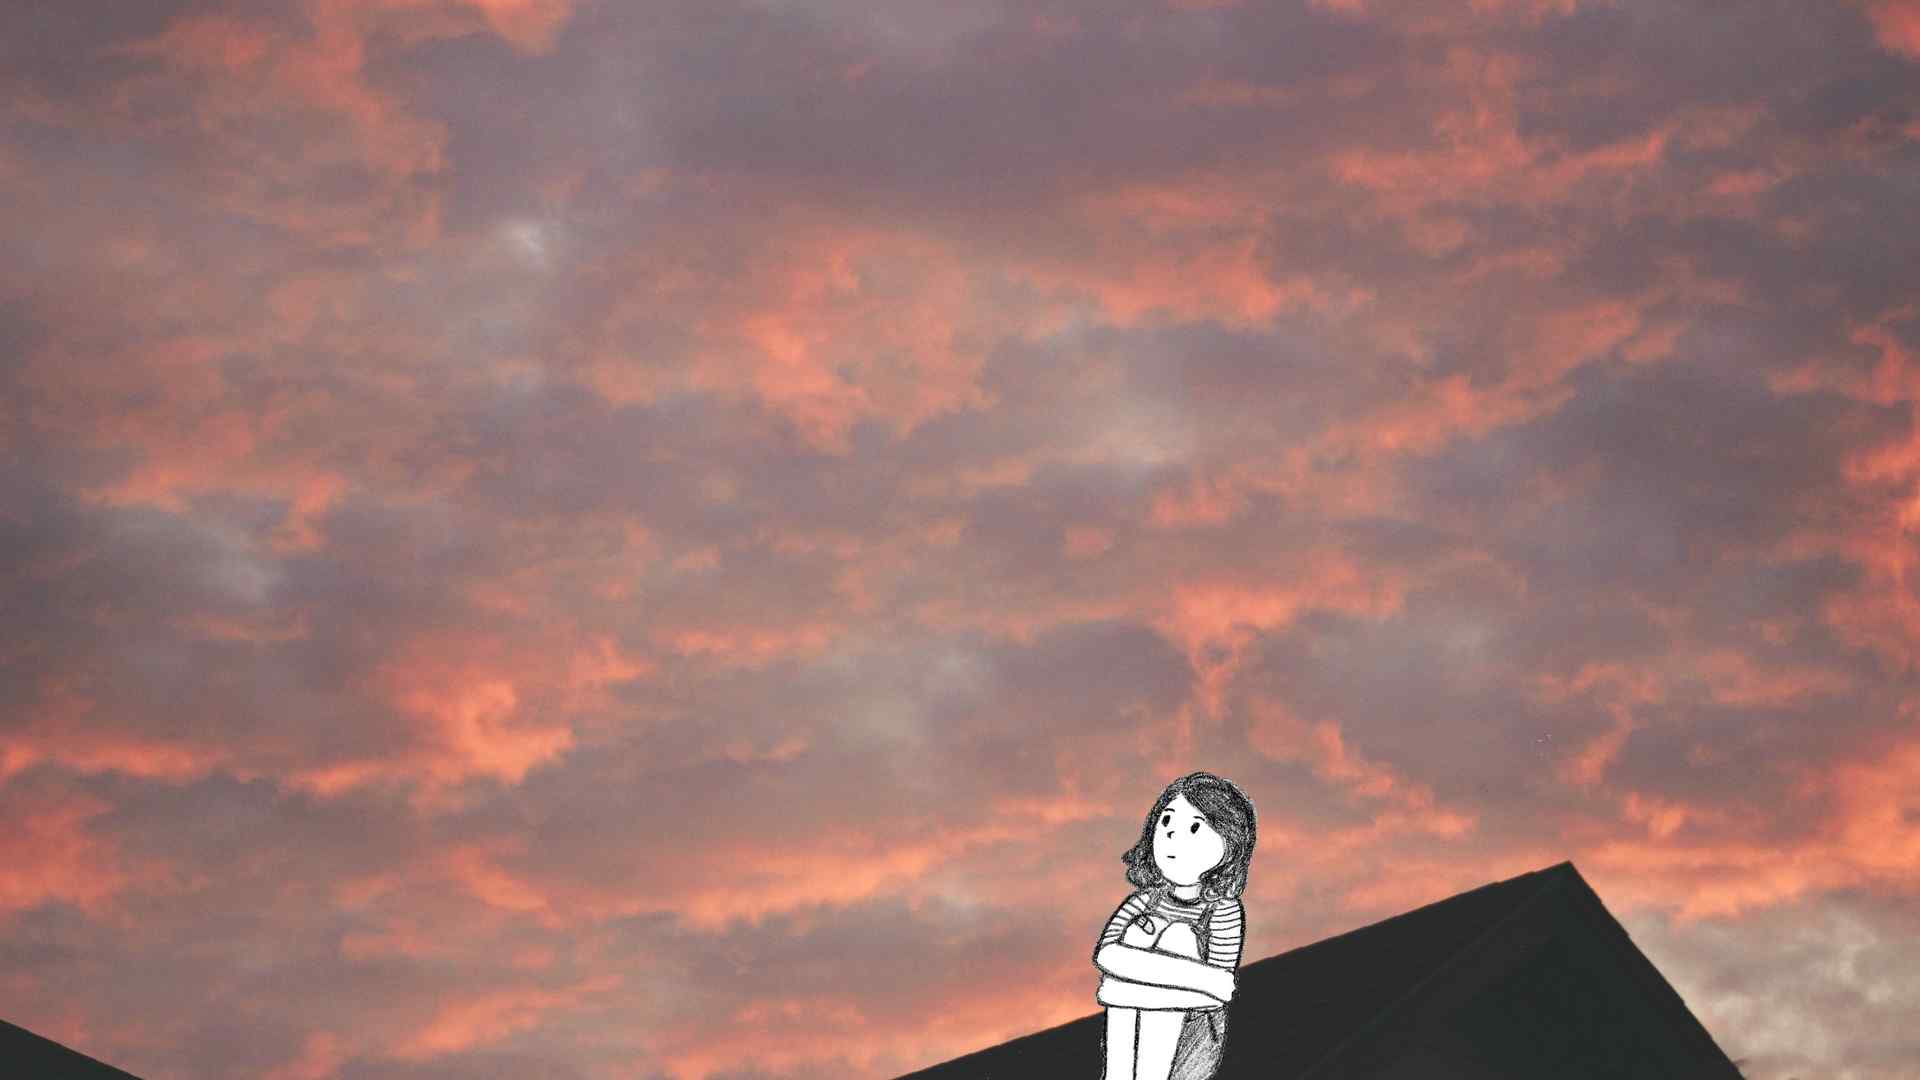 A cloudy sky as the sun is setting, with a pencil drawing of a girl sitting on a rooftop